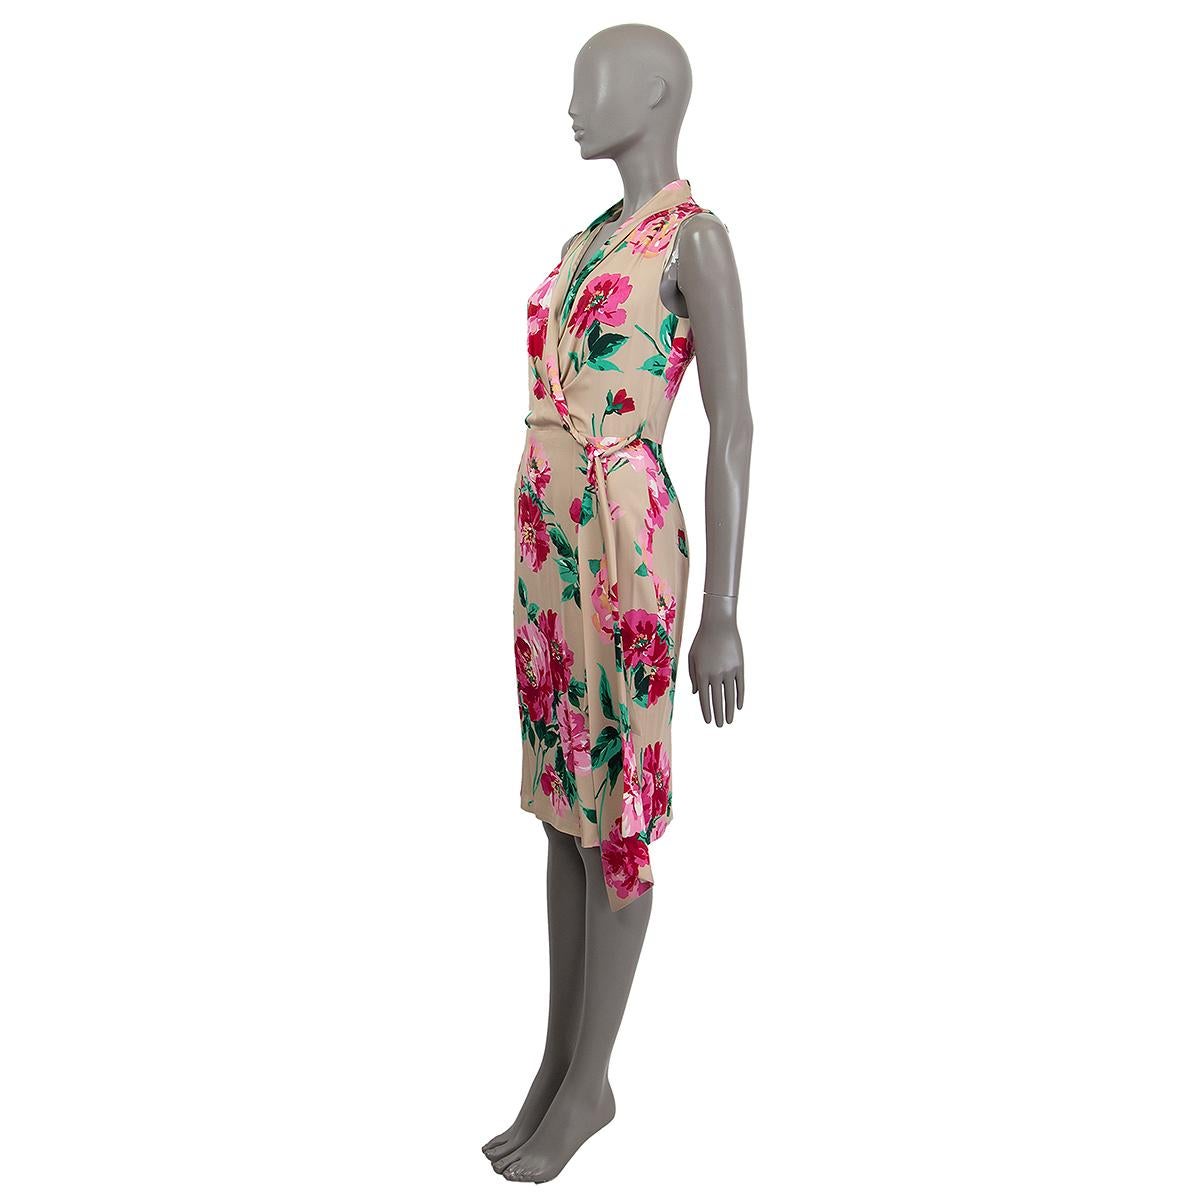 100% authentic Dolce & Gabbana sleeves wrap dress in beige silk (with 6% elastane) with pink and greeen floral print. Opens with a zipper in the back. Lined in silk (with 4% elastane). Has been worn and is in excellent condition.

Measurements
Tag